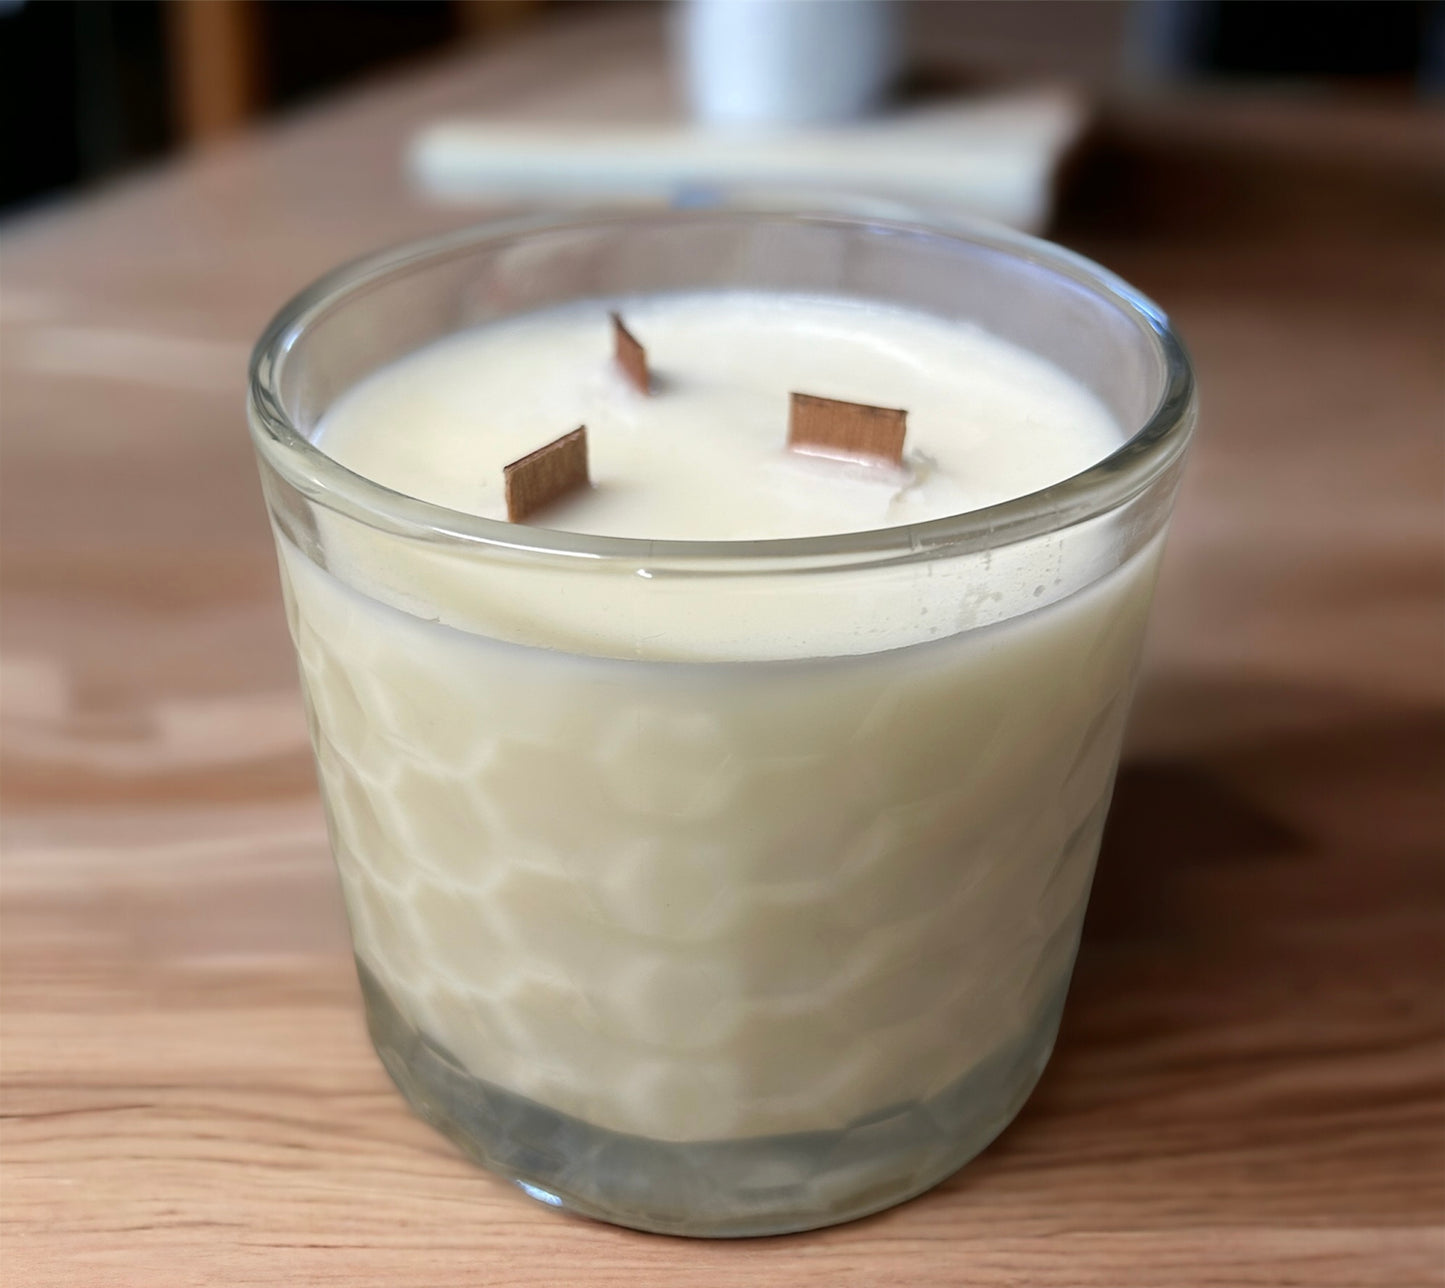 16oz Soy Wax Candle: Lemon Lavender Aroma | Relaxing Scent | Scents By Sam